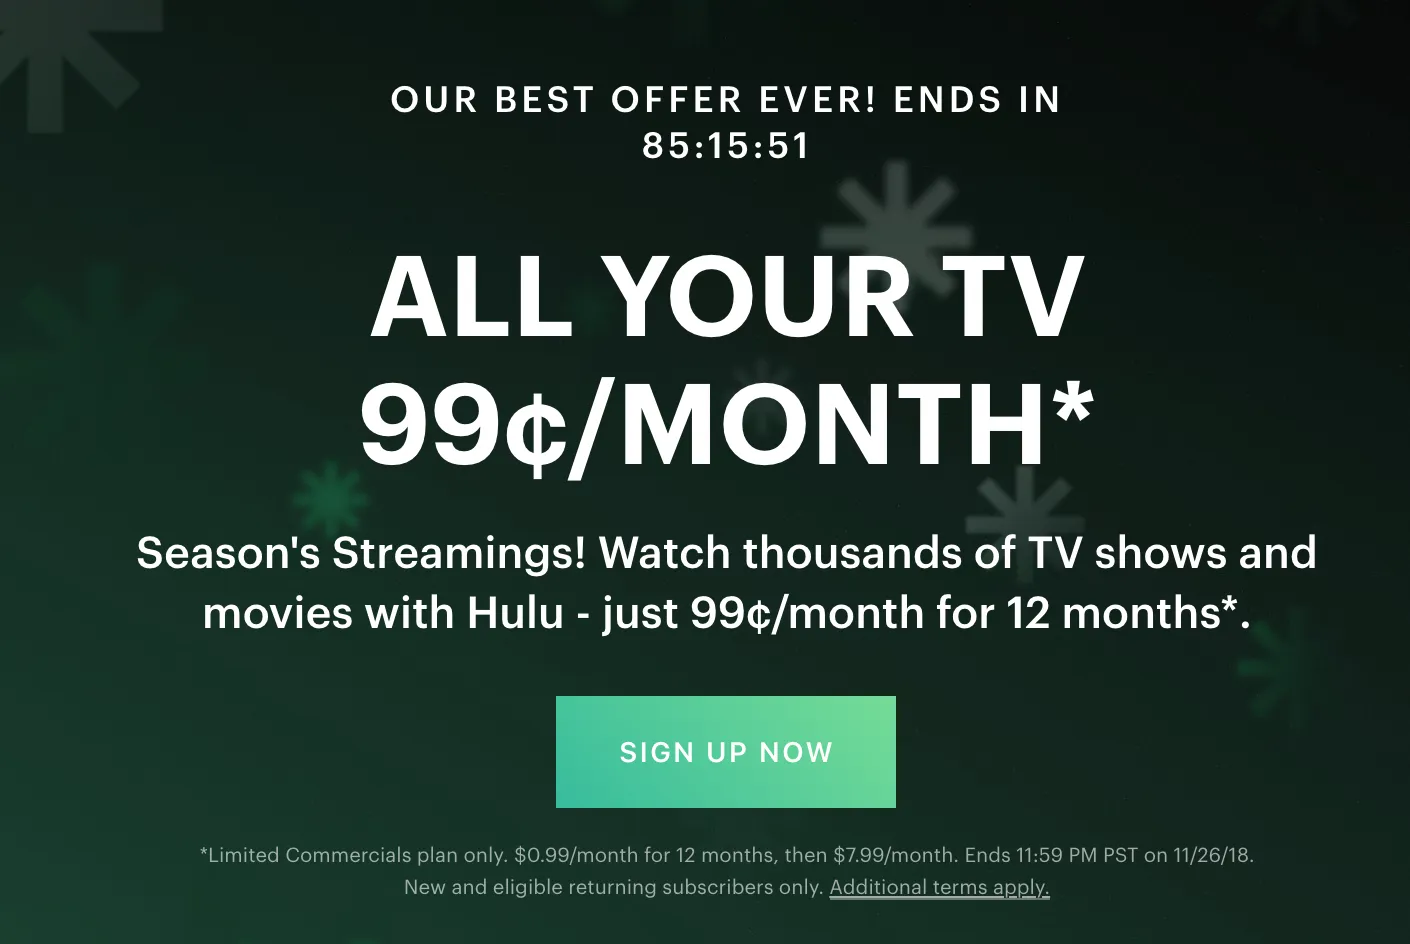 Hulu Limited Commercial Plan for $0.99 a month, up to 1 year